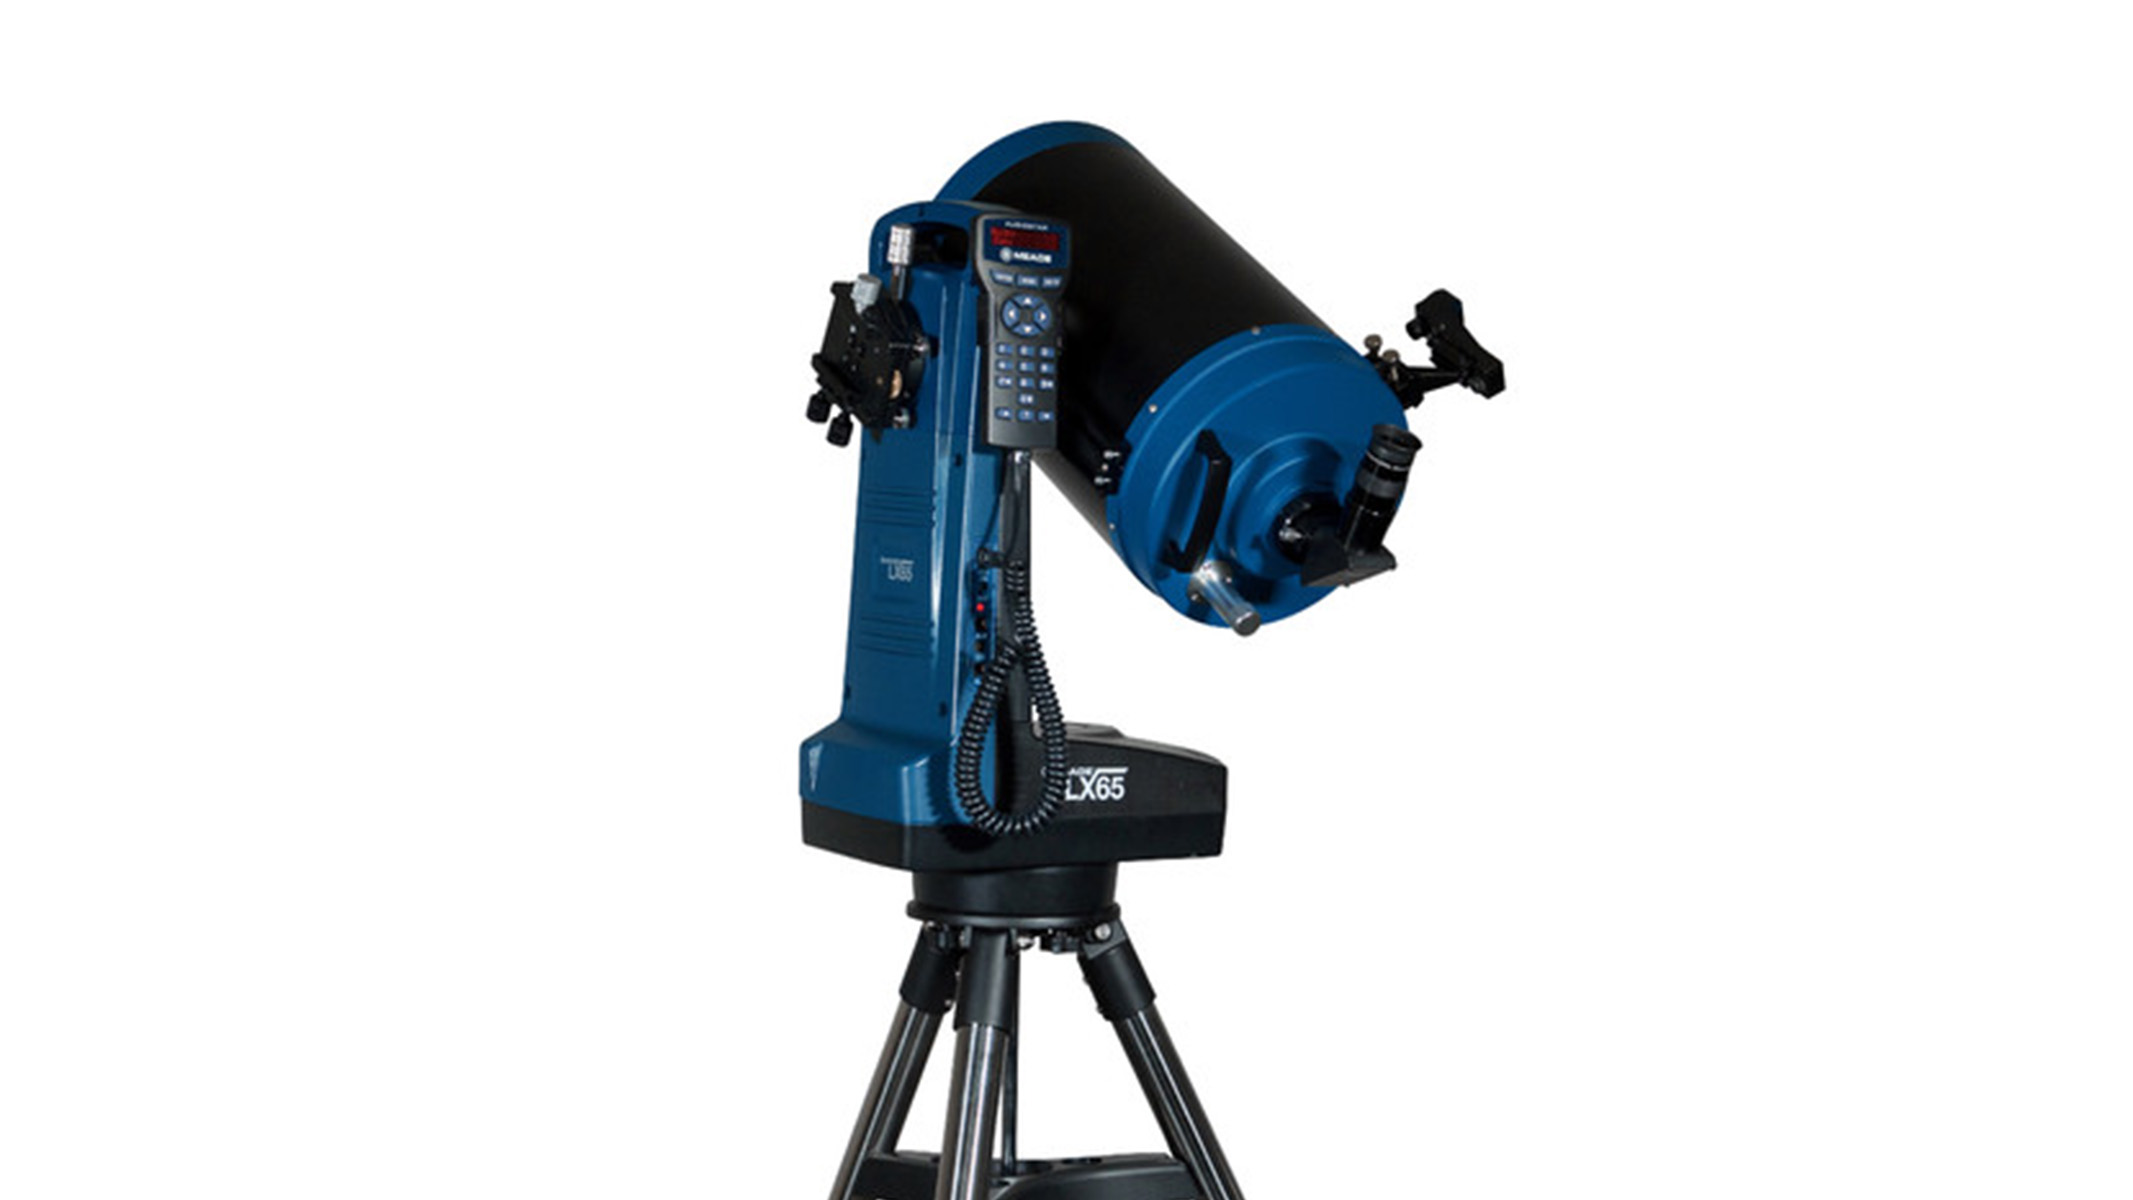 Product photo of Meade Instruments LX65 GoTo telescope